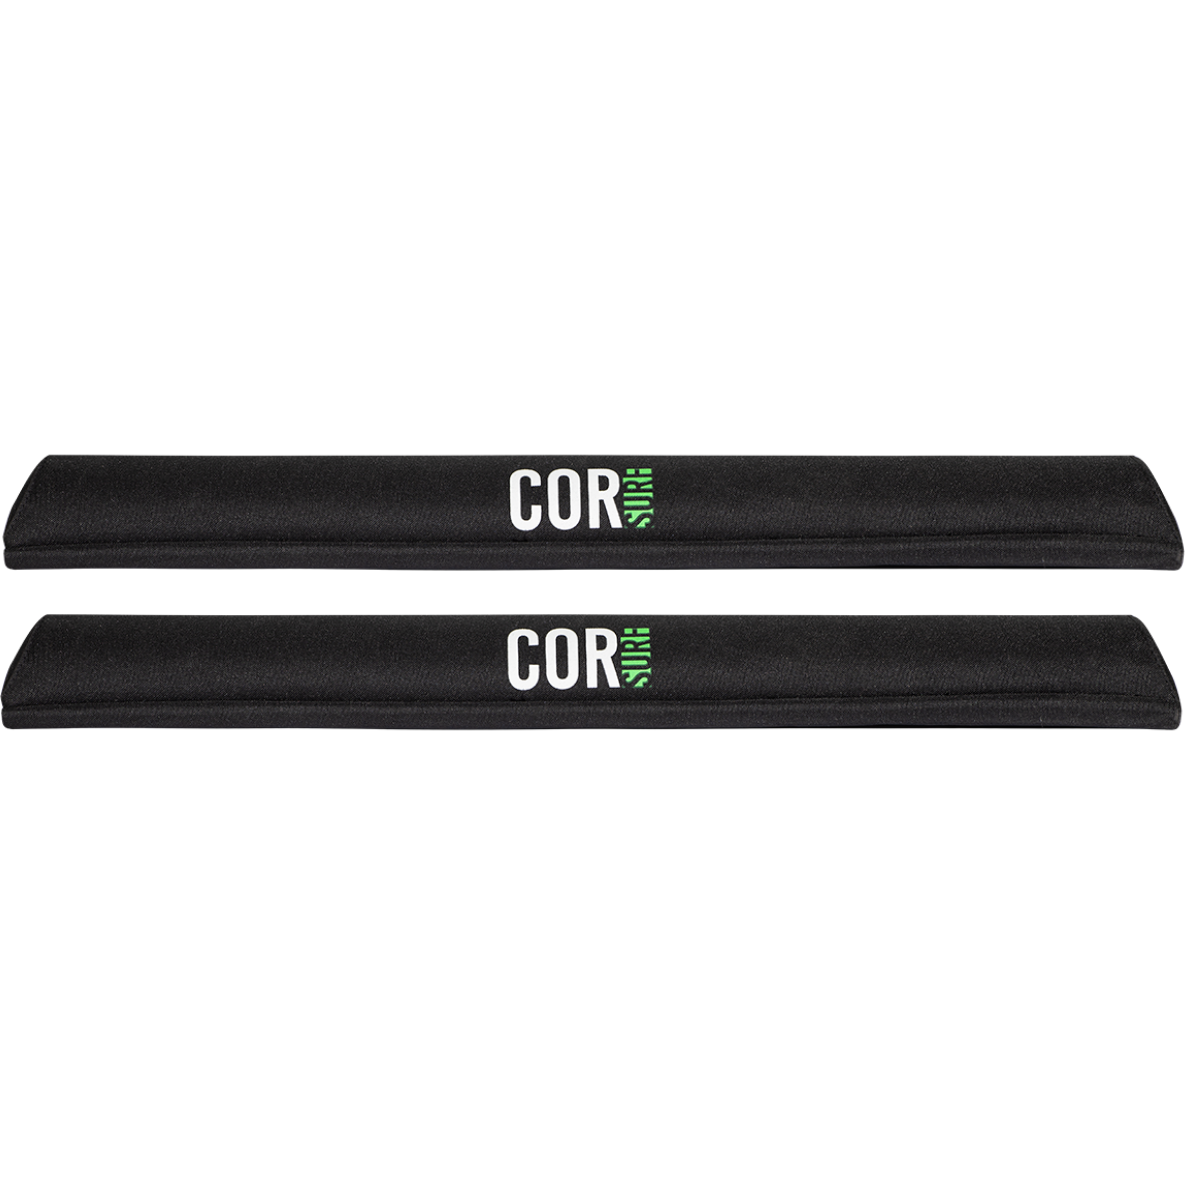 Aero Roof Rack Pads 19" or 28" - For Large Aero Bars